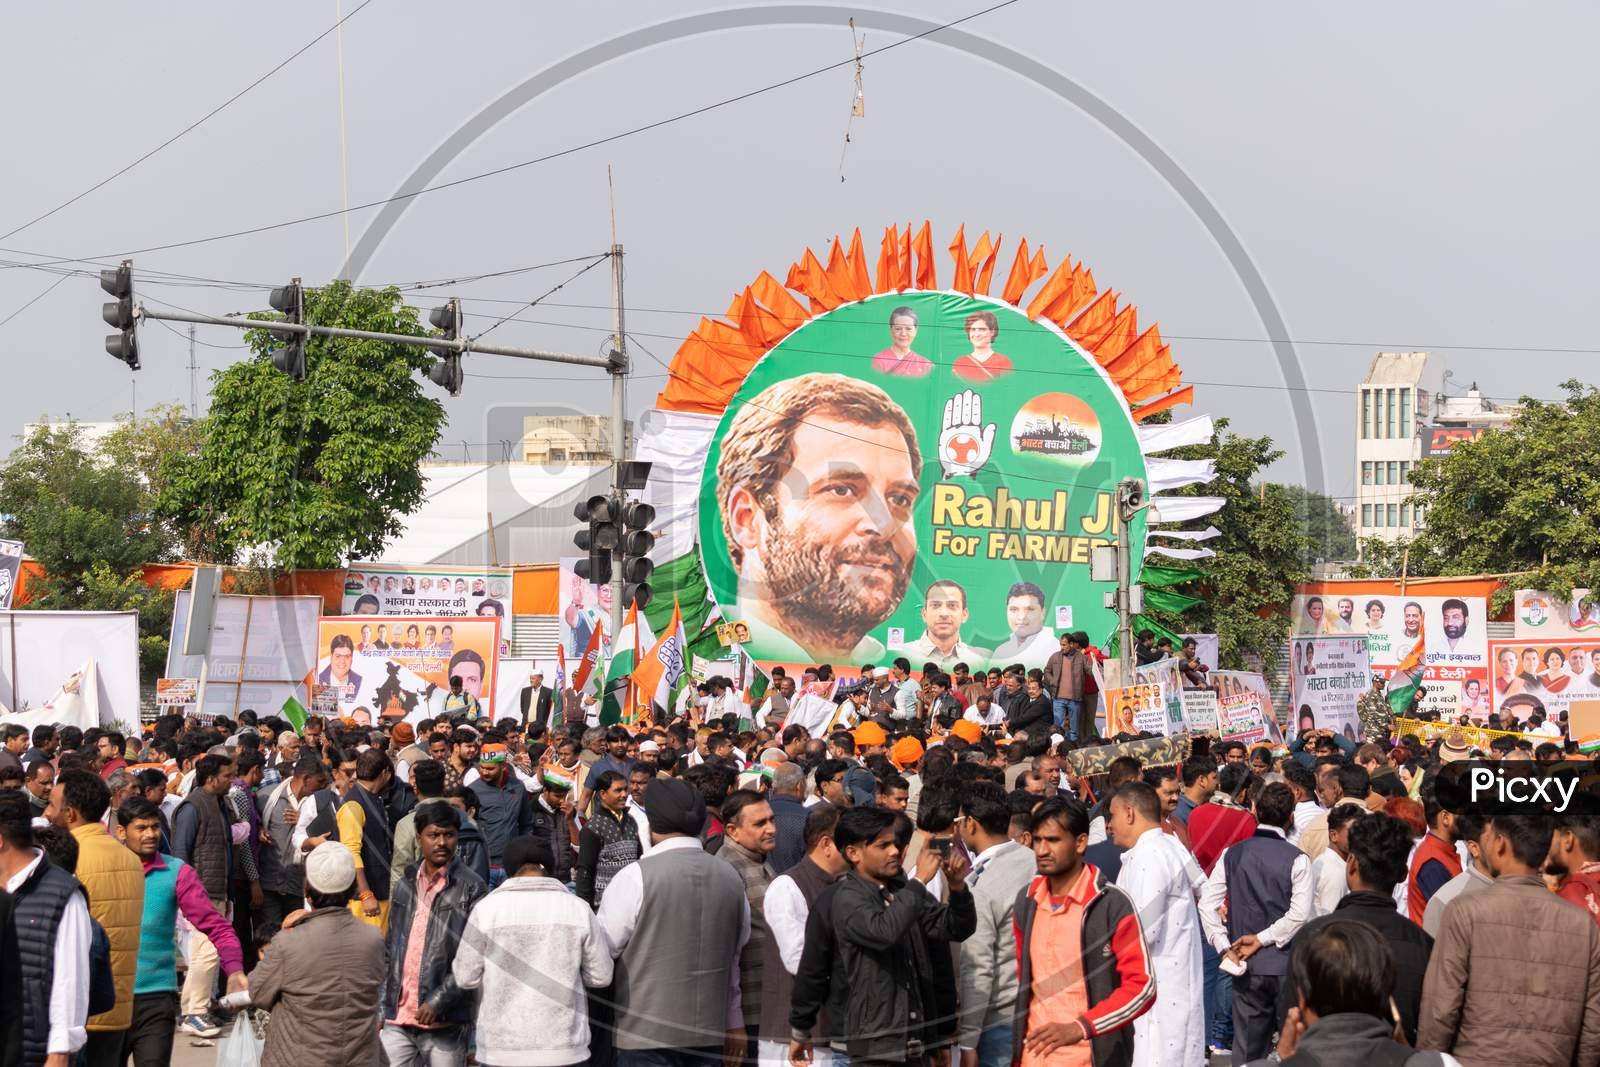 photos of Rahul Gandhi in a Poster during 'Bharat Bachao' rally by Congress in Delhi to highlight Modi govt failures